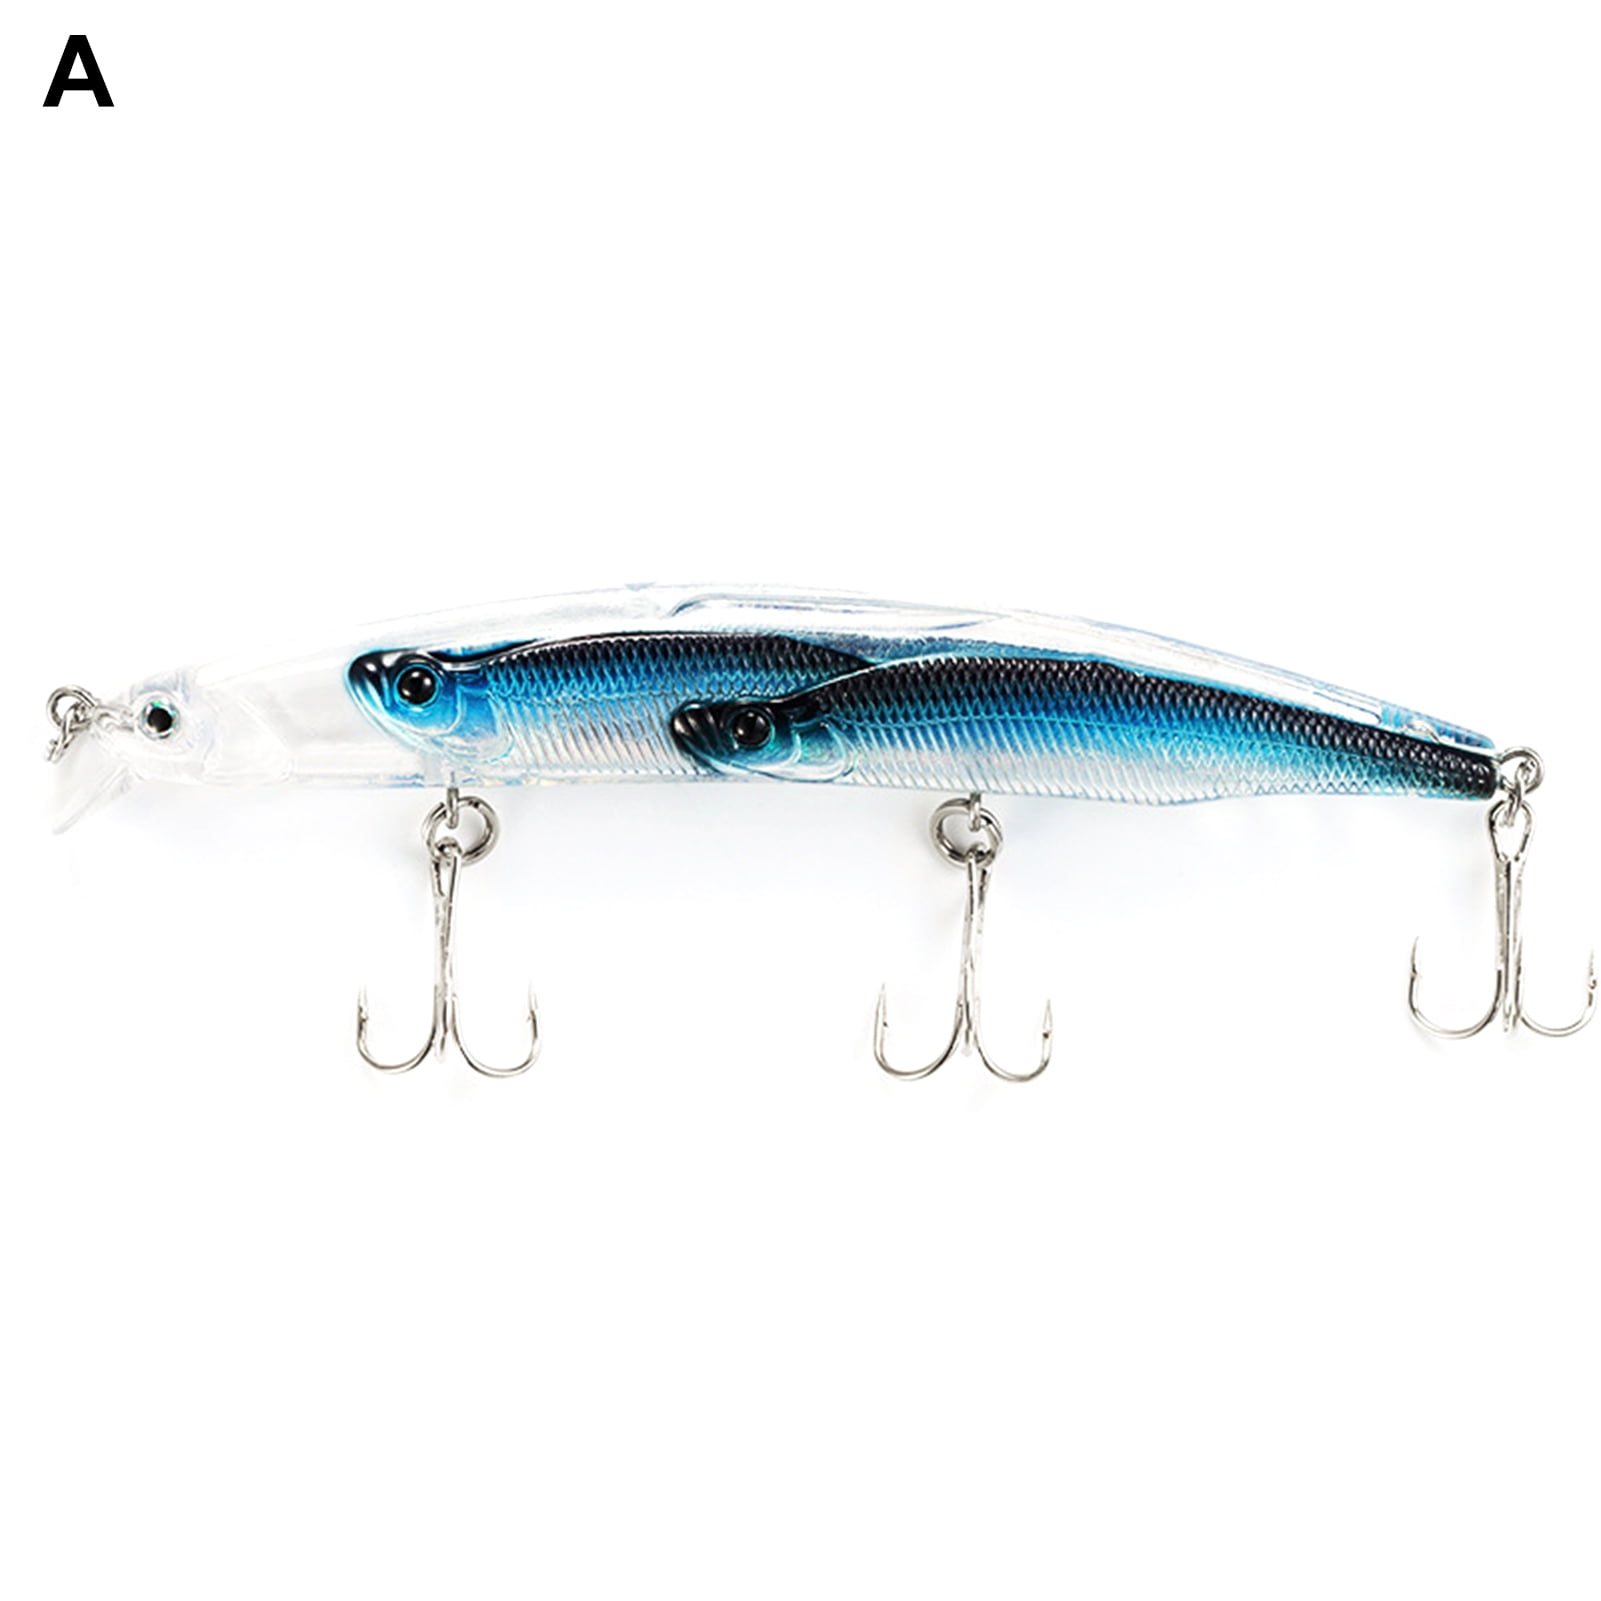 10pcs Fishing Spoon Metal Lure with Sharp Treble Hooks Hard Bait Jig Spinner Trout Bass Salmon Lures 5g,7g,14g,21g,28g 